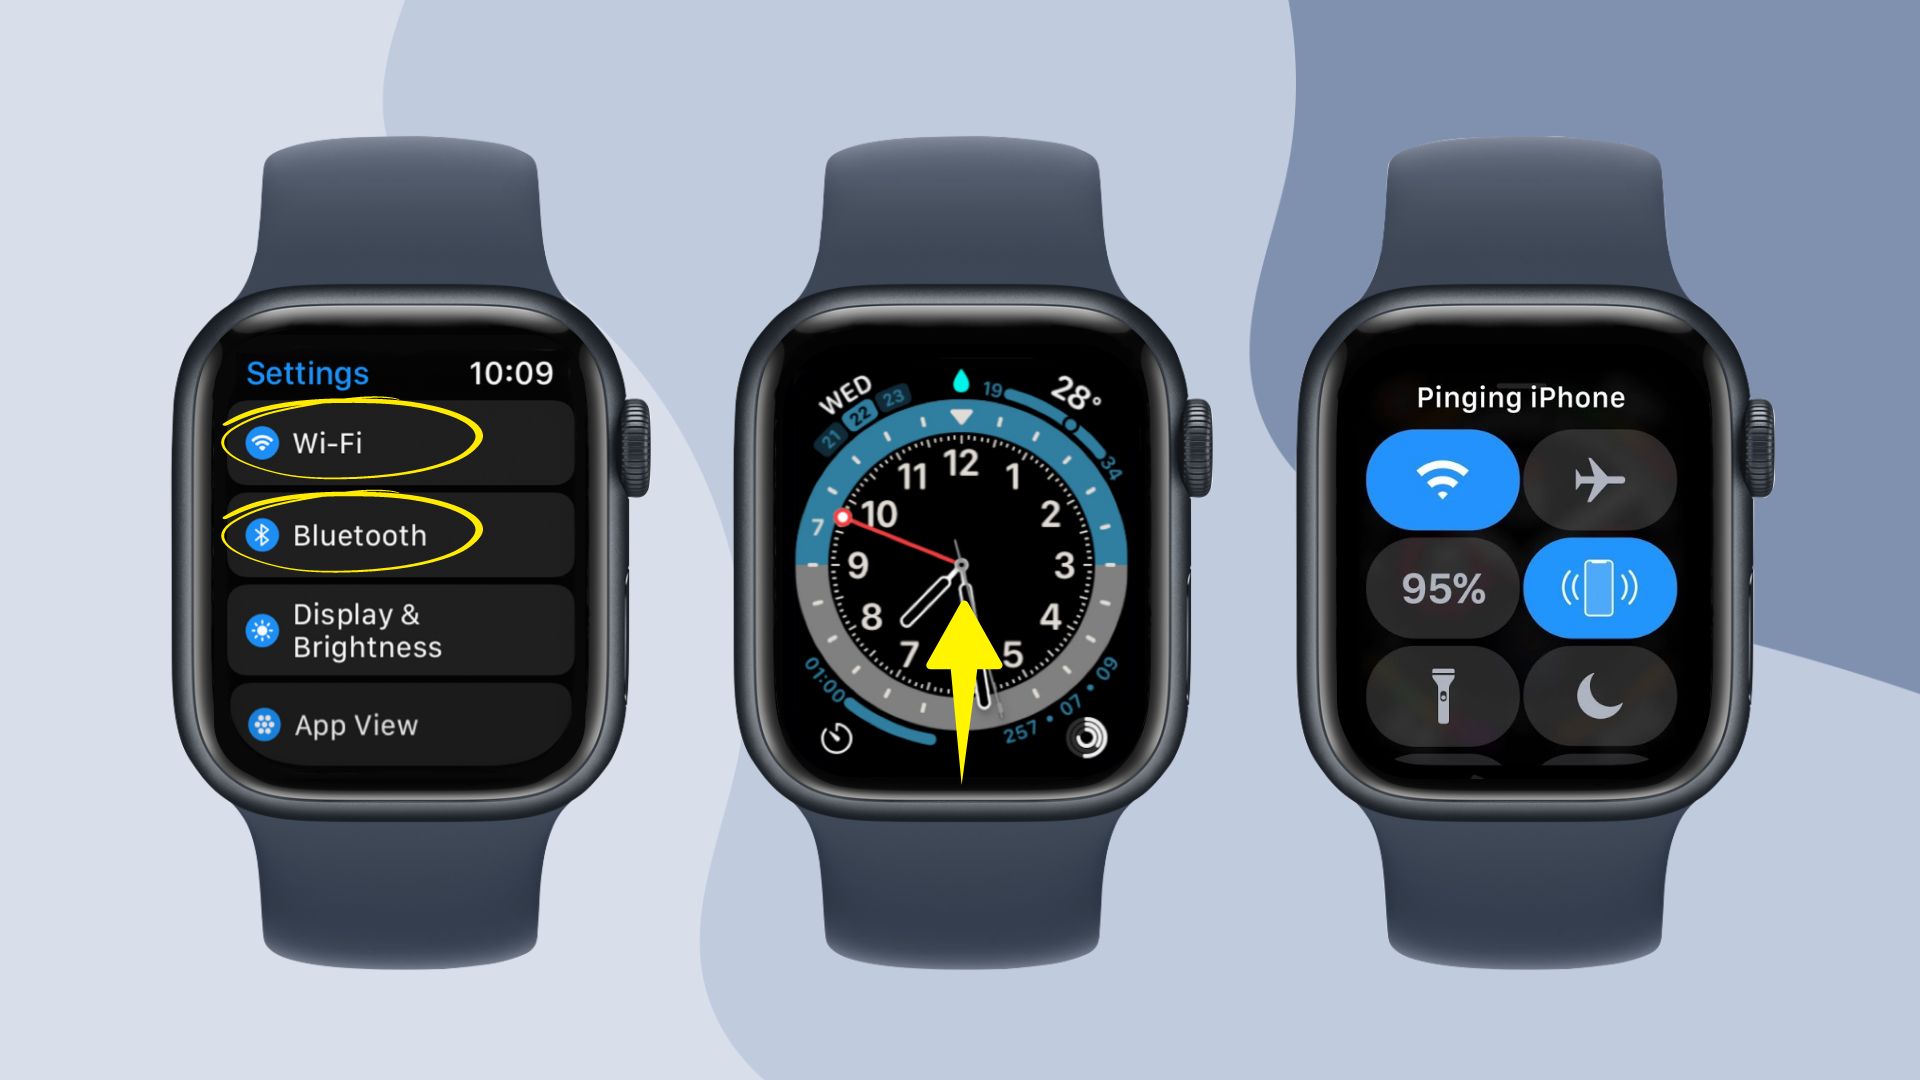 Step-by-step procedure on how to connect your Apple Watch with an iPhone